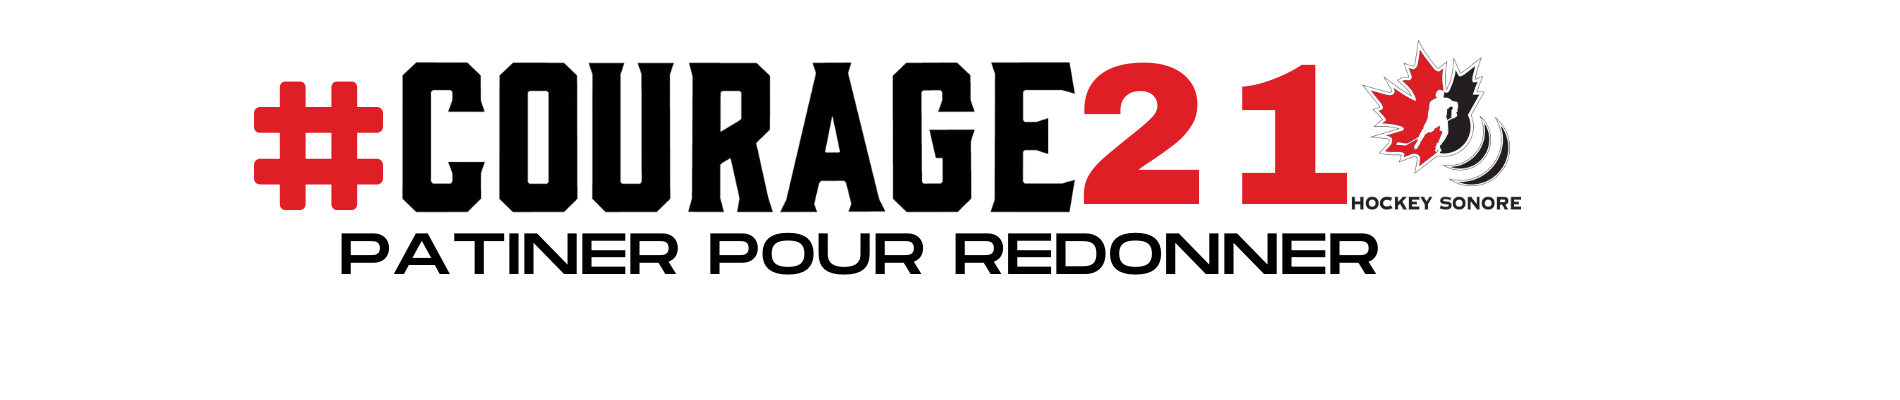 courage21 French logo 